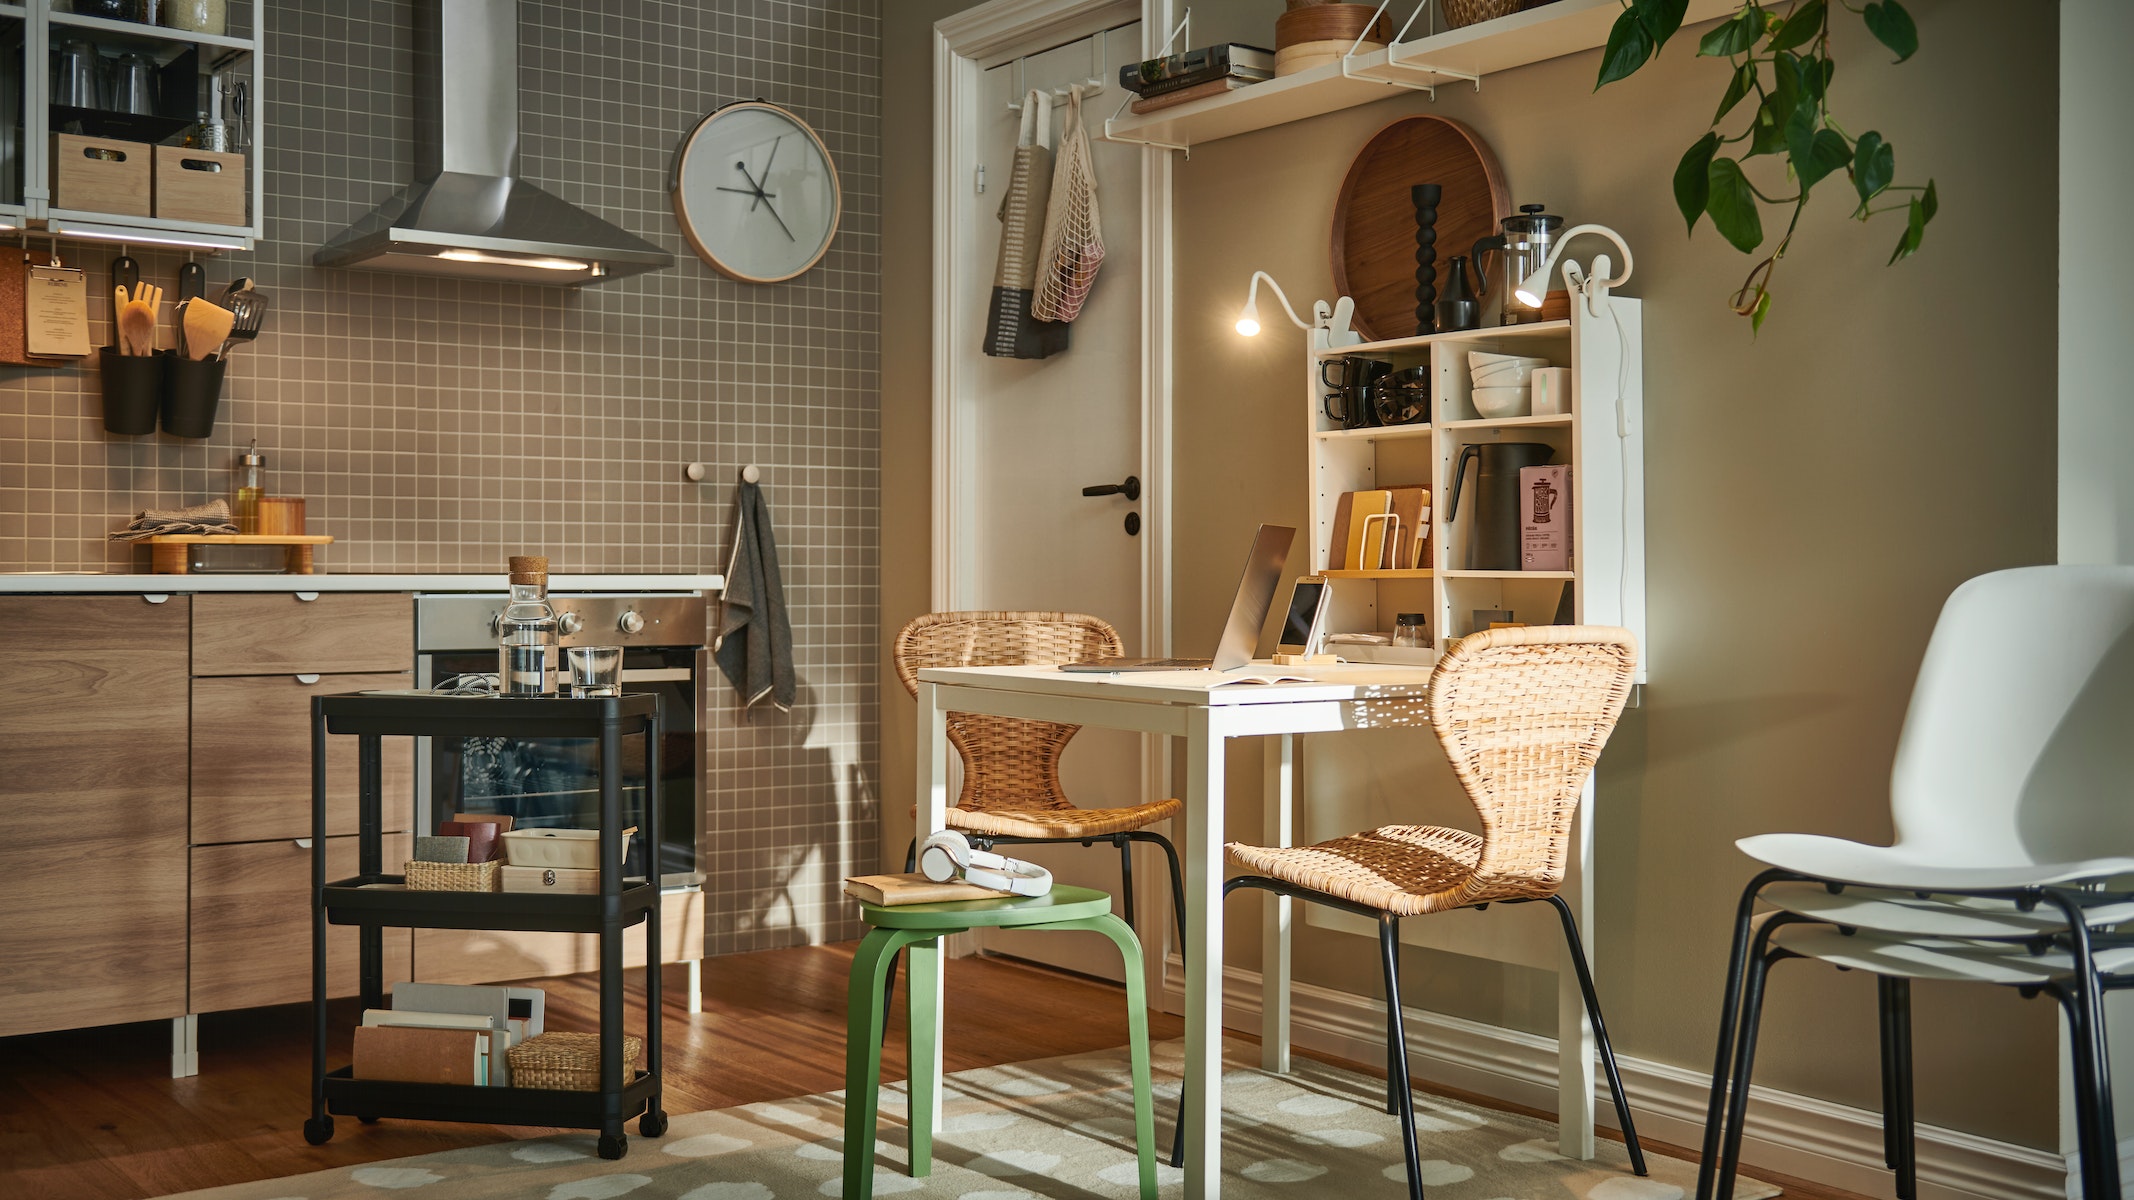 IKEA - A modern, small-space dining room working double shifts